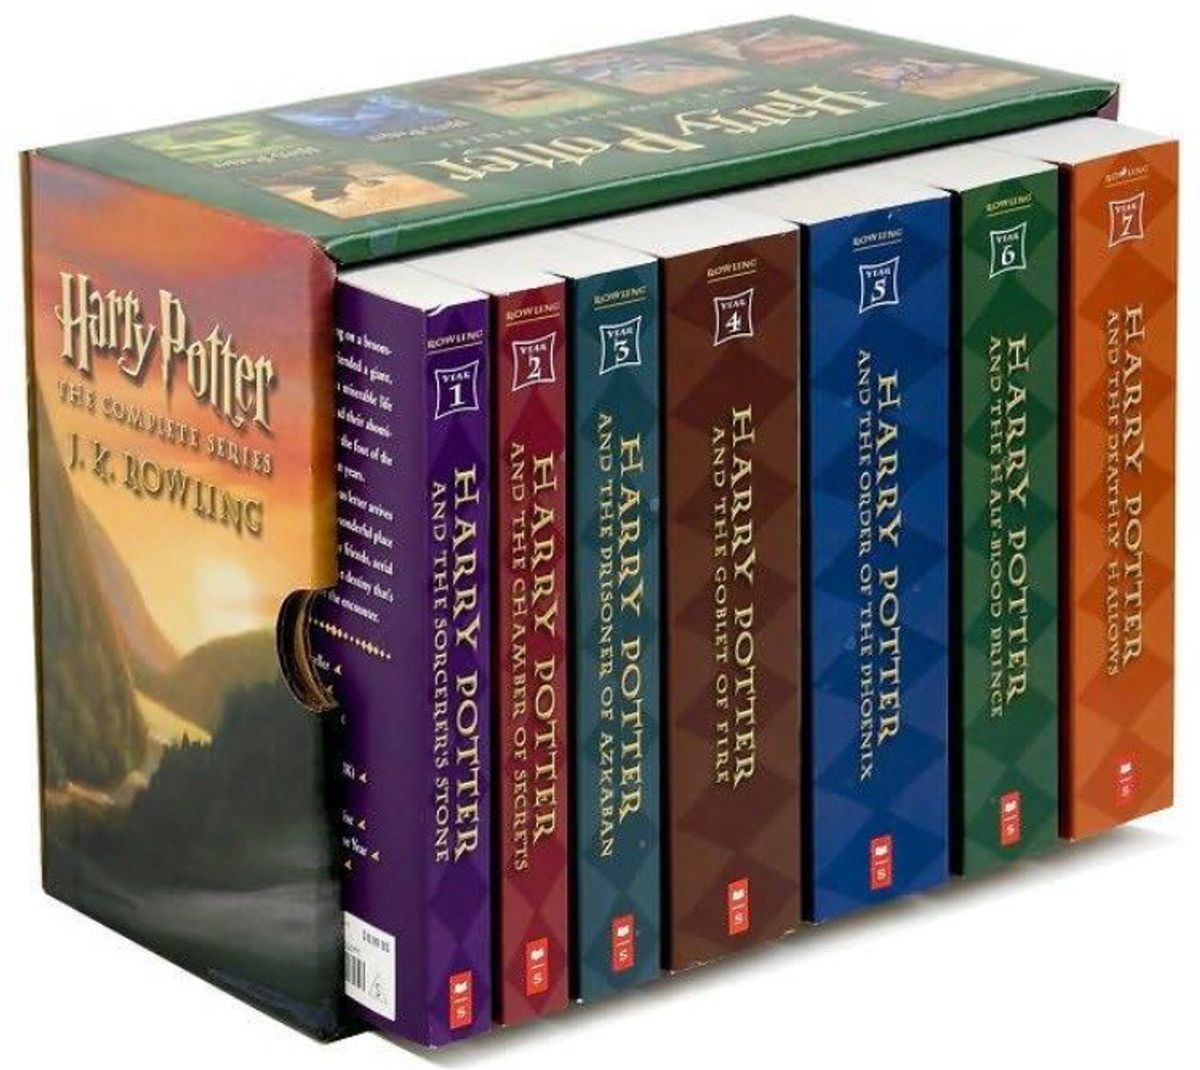 Four Reasons Why Harry Potter Has Helped Me Grow